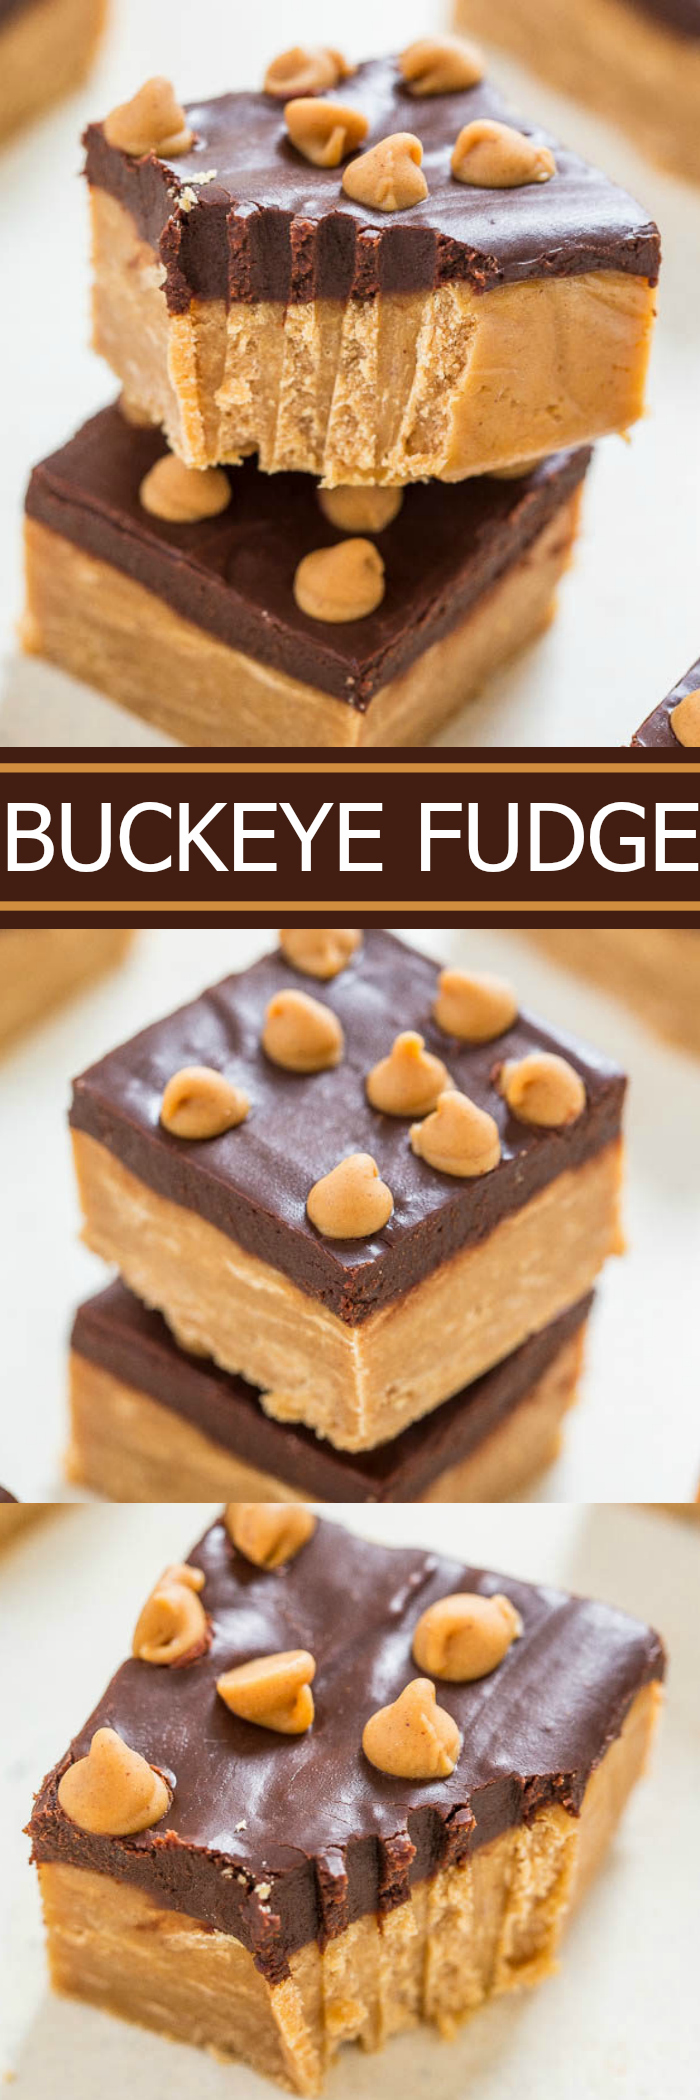 Buckeye Fudge - EASY, no-cook, no-fuss, FOOLPROOF fudge that's ready in 1 hour!! Dense, chewy and full of rich peanut butter flavor with a smooth, fudgy chocolate topping! It's irresistible!!